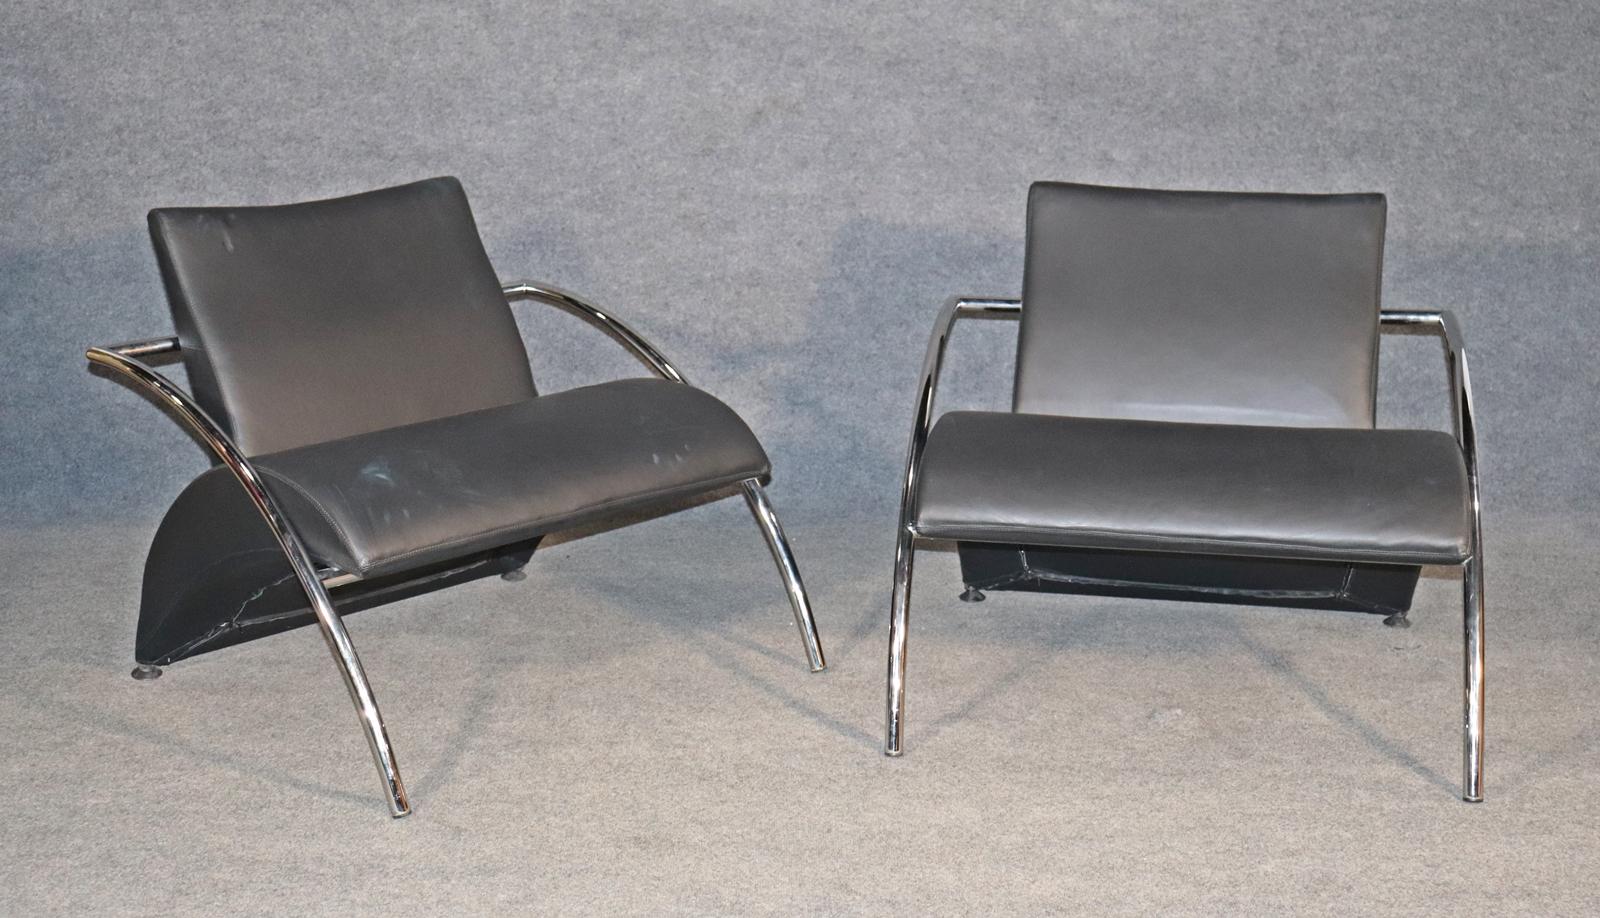 Italian Divano Naiadi Attributed Leather and Chrome Mid-Century Modern Lounge Chairs